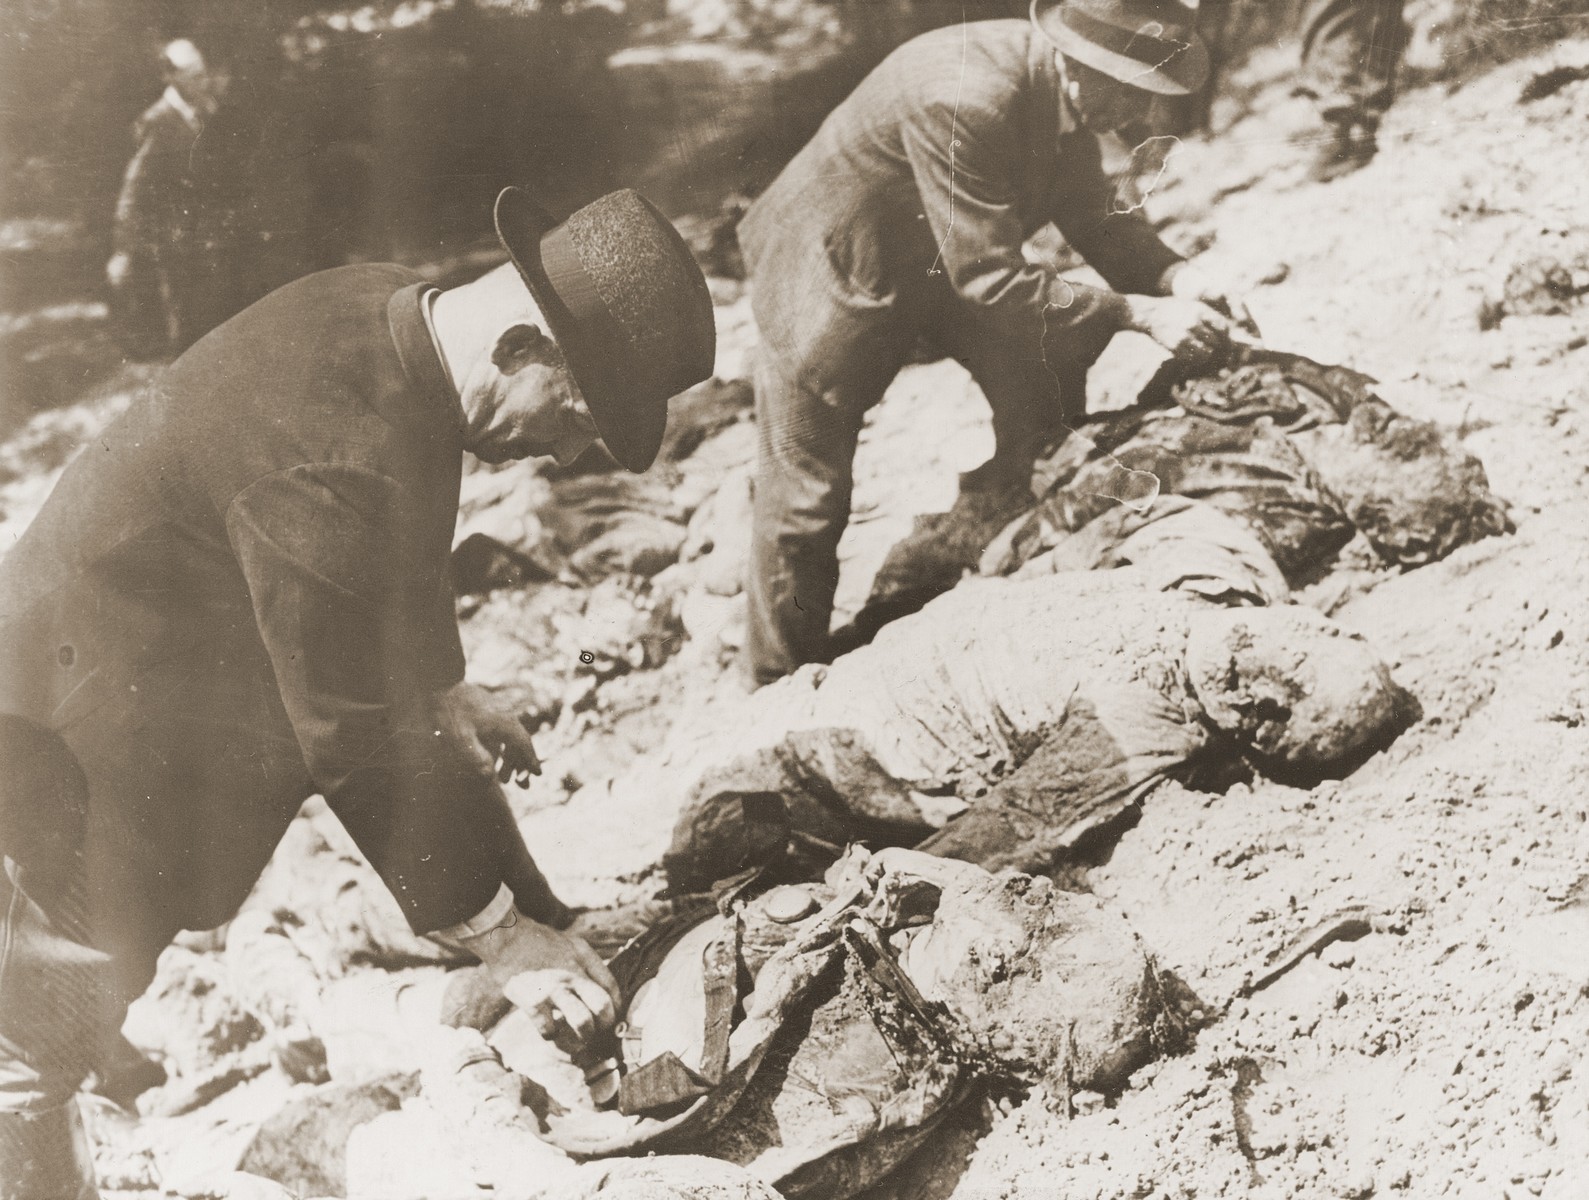 German civilians identify the bodies of 71 political prisoners exhumed from a mass grave on Wenzelnberg near Solingen-Ohligs.  

The victims, most of whom were taken from Luettringhausen prison, were shot and buried by the Gestapo following orders to eliminate all Reich enemies just before the end of the war.